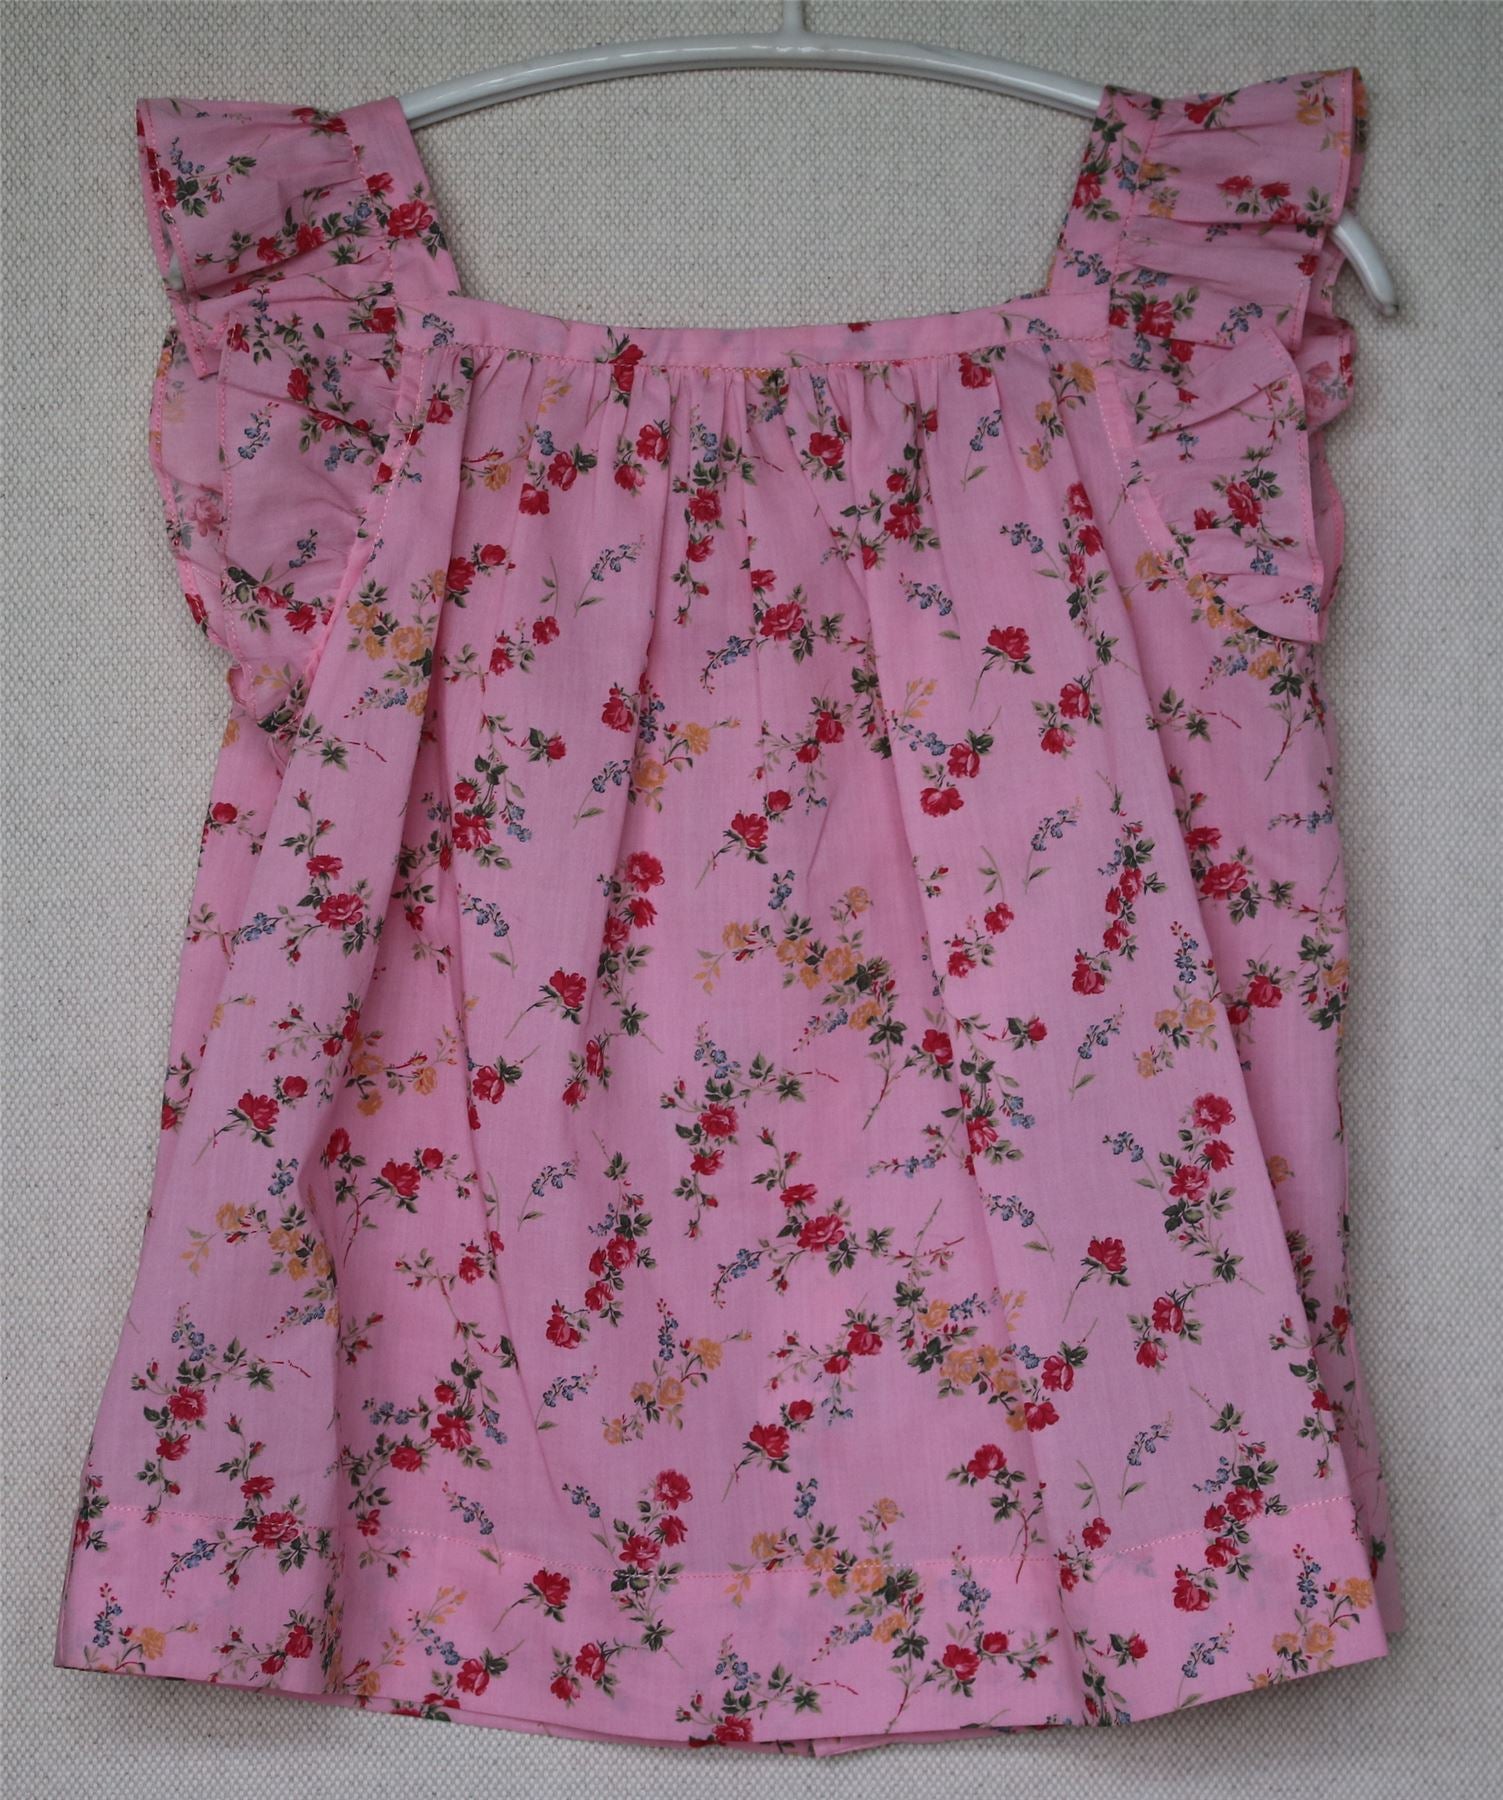 BONPOINT GIRLS PINK FLORAL ELISE TOP 4 YEARS